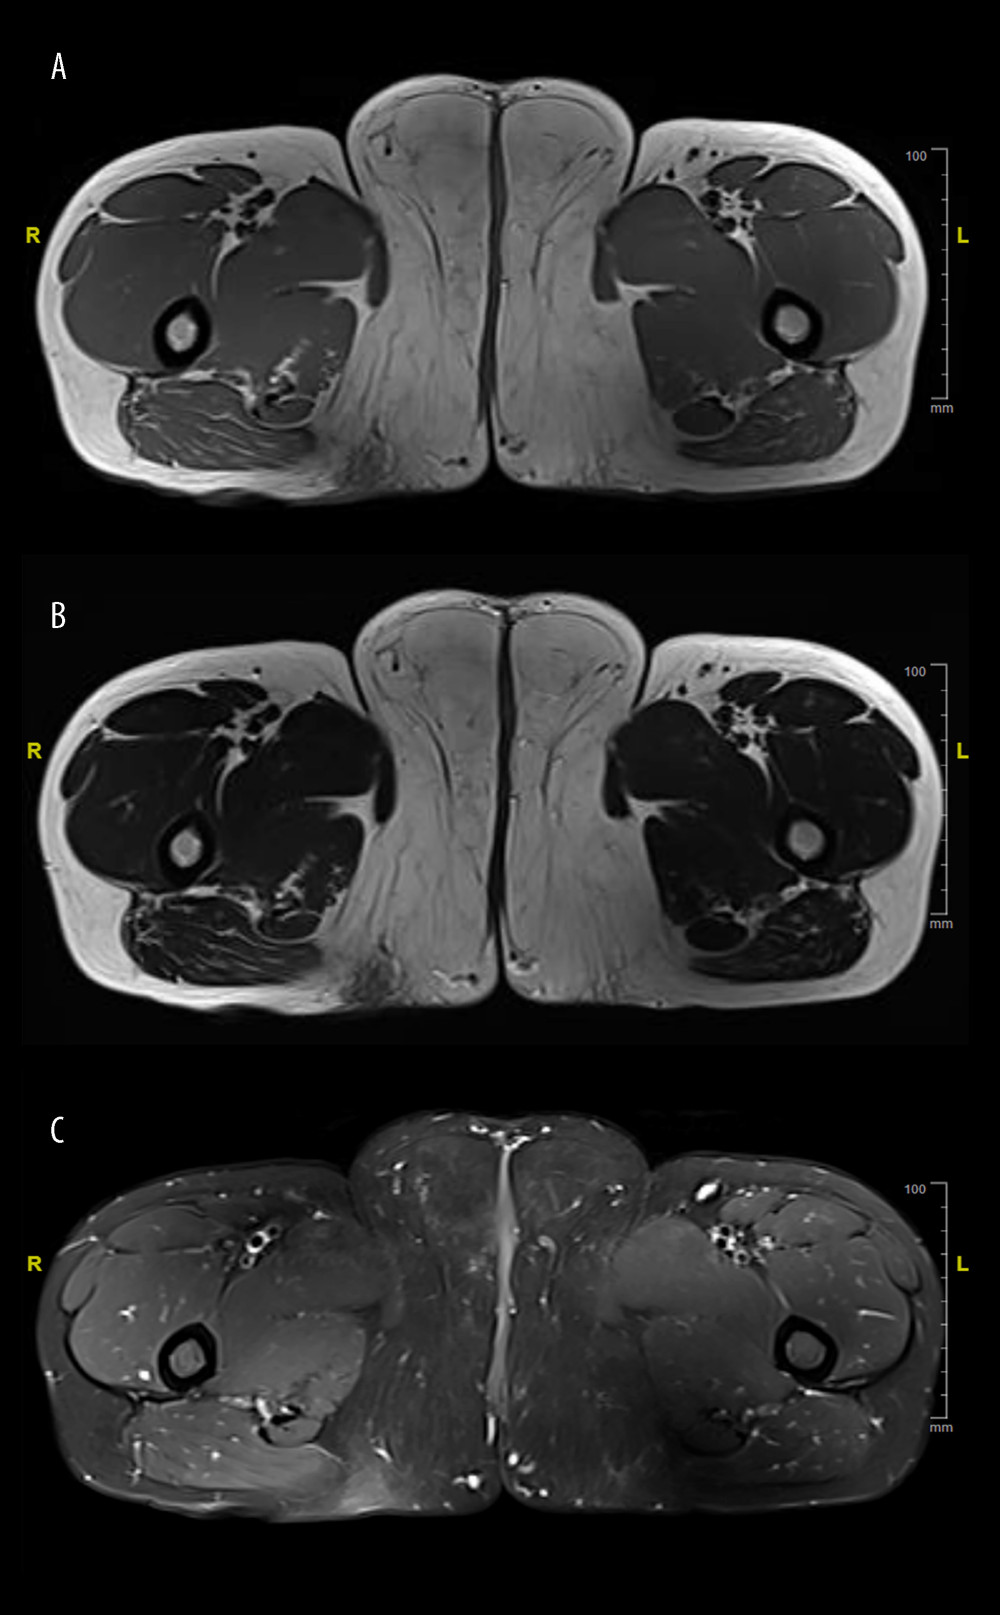 MRI images of the mass. (A) T1-mapping of the mass. (B) Soft-tissue mass of high-signal intensity. (C) T2-mapping of the mass. Soft-tissue mass of high-signal intensity with low-signal intensity fibrous septa. T2-mapping of fat suppression. Soft-tissue mass showing low-signal intensity.